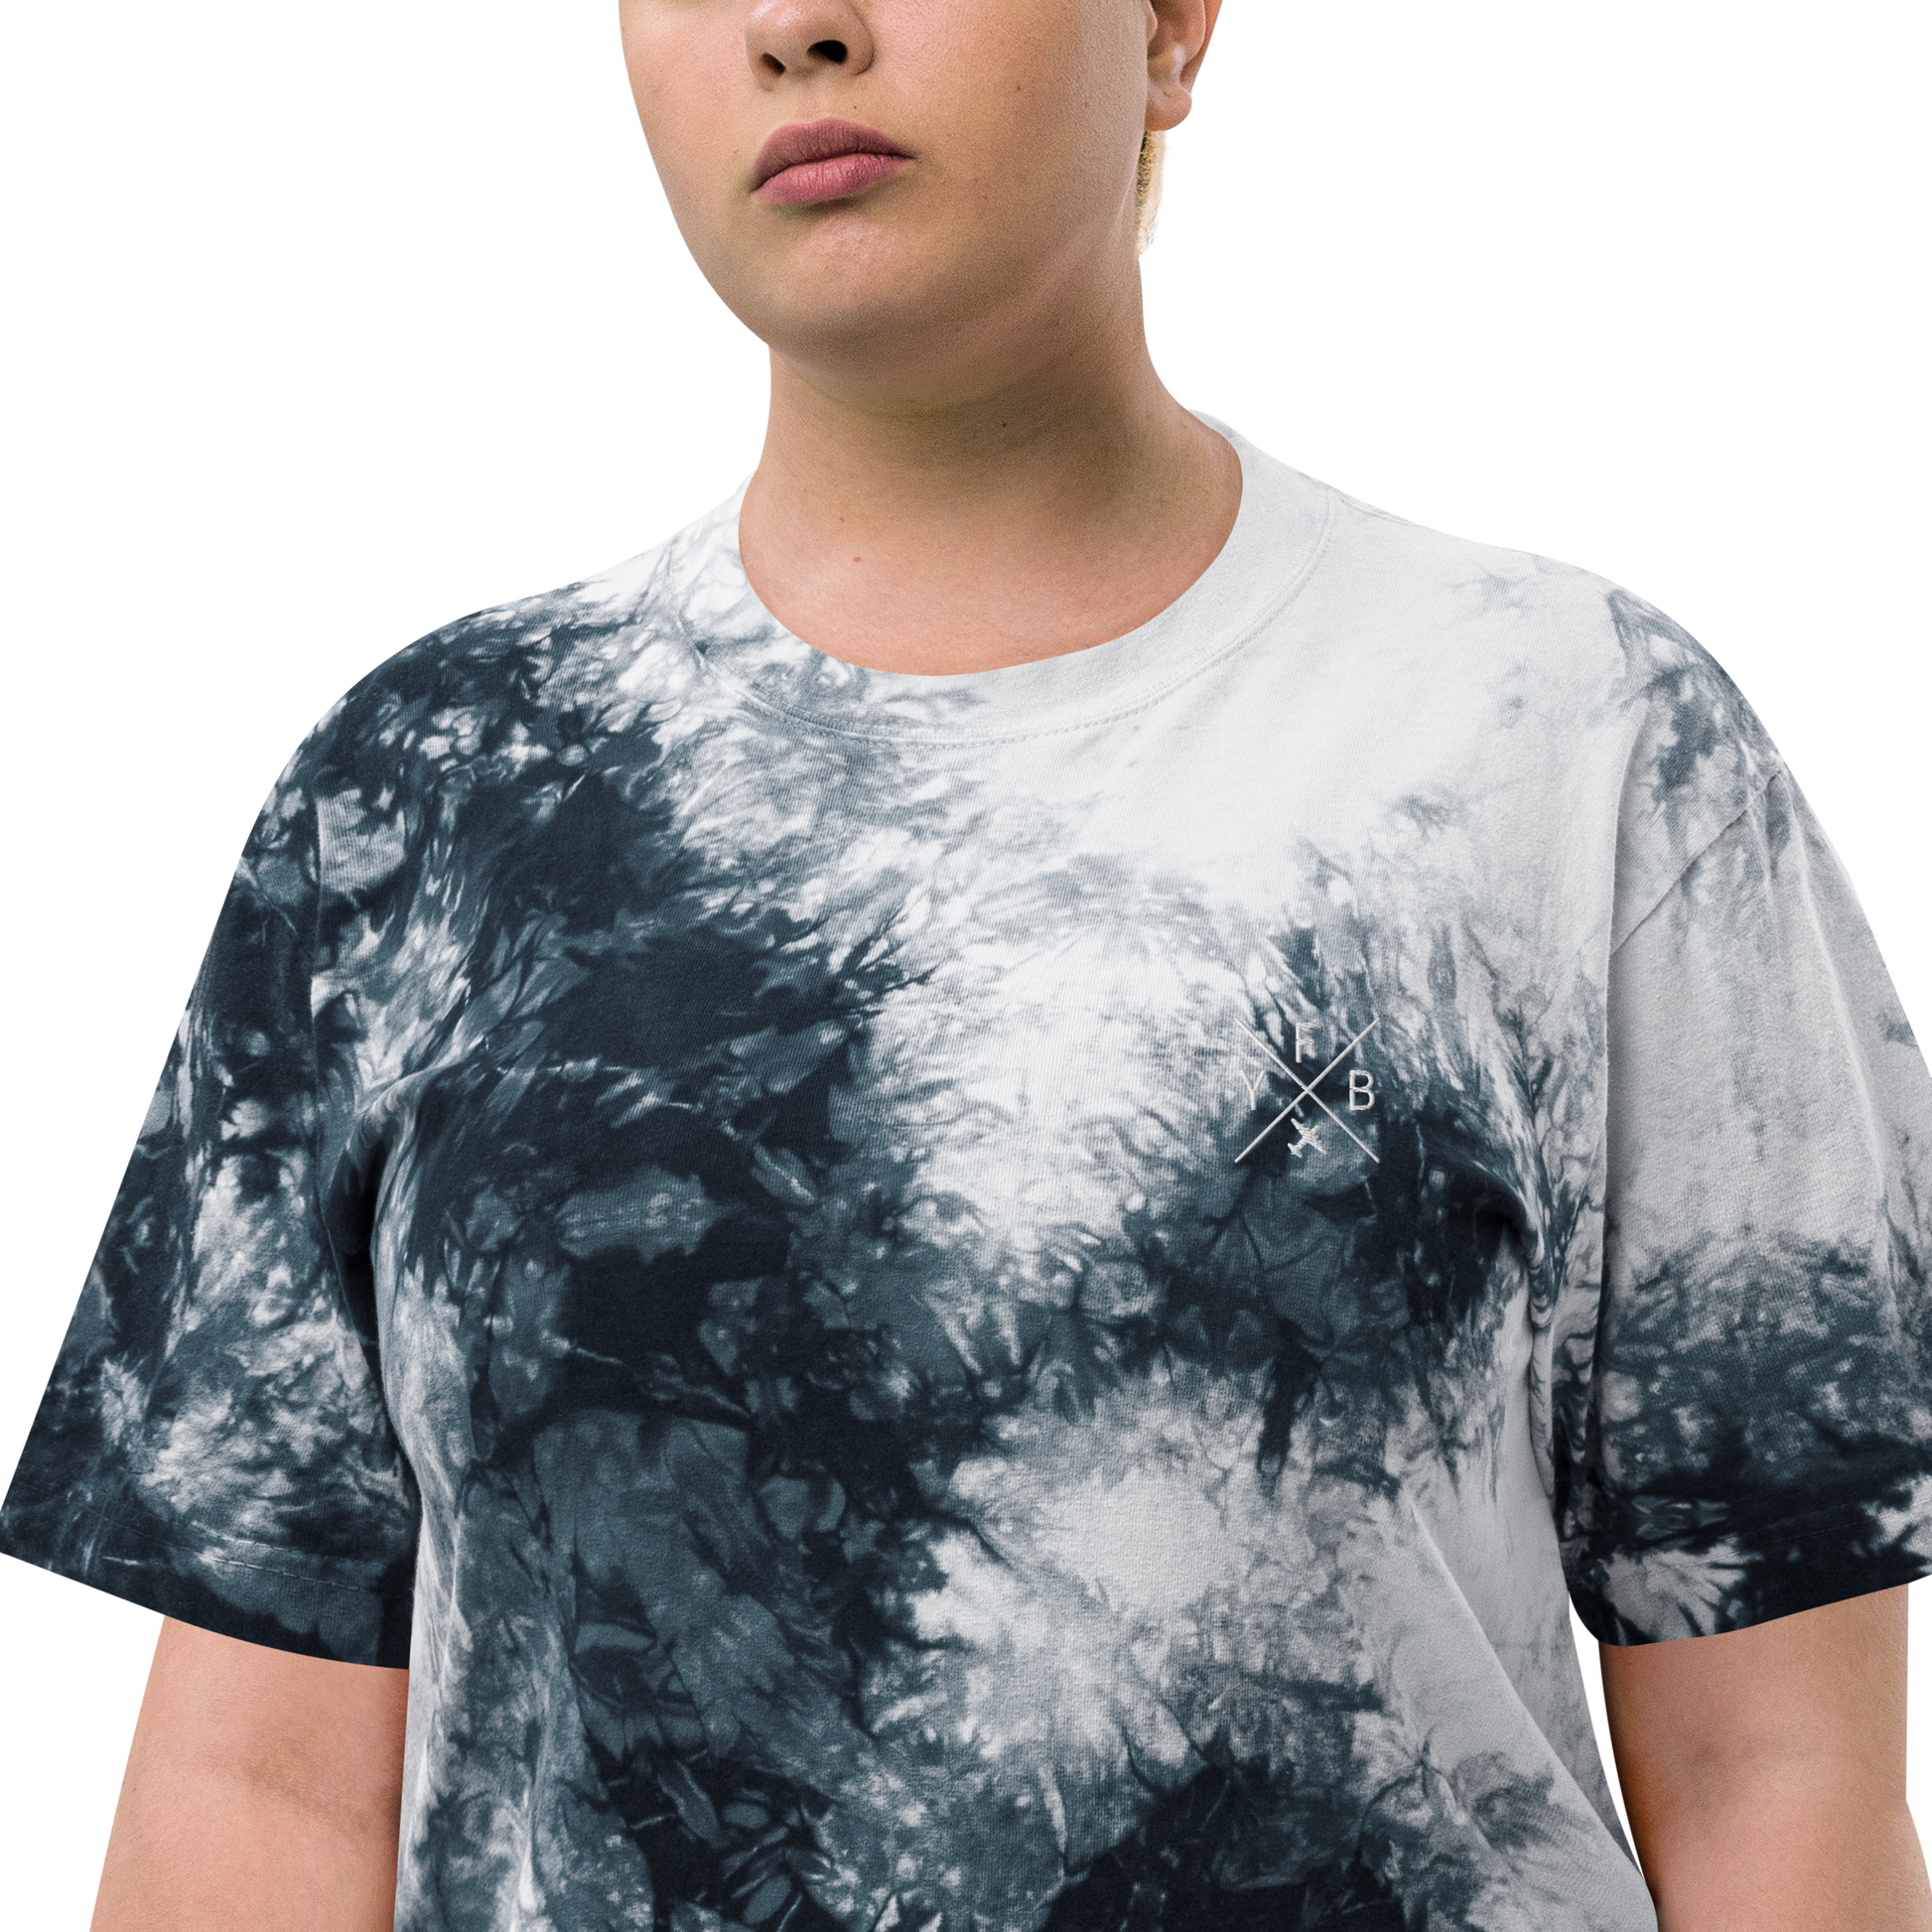 YHM Designs - YFB Iqaluit Oversized Tie-Dye T-Shirt - Crossed-X Design with Airport Code and Vintage Propliner - White Embroidery - Image 18